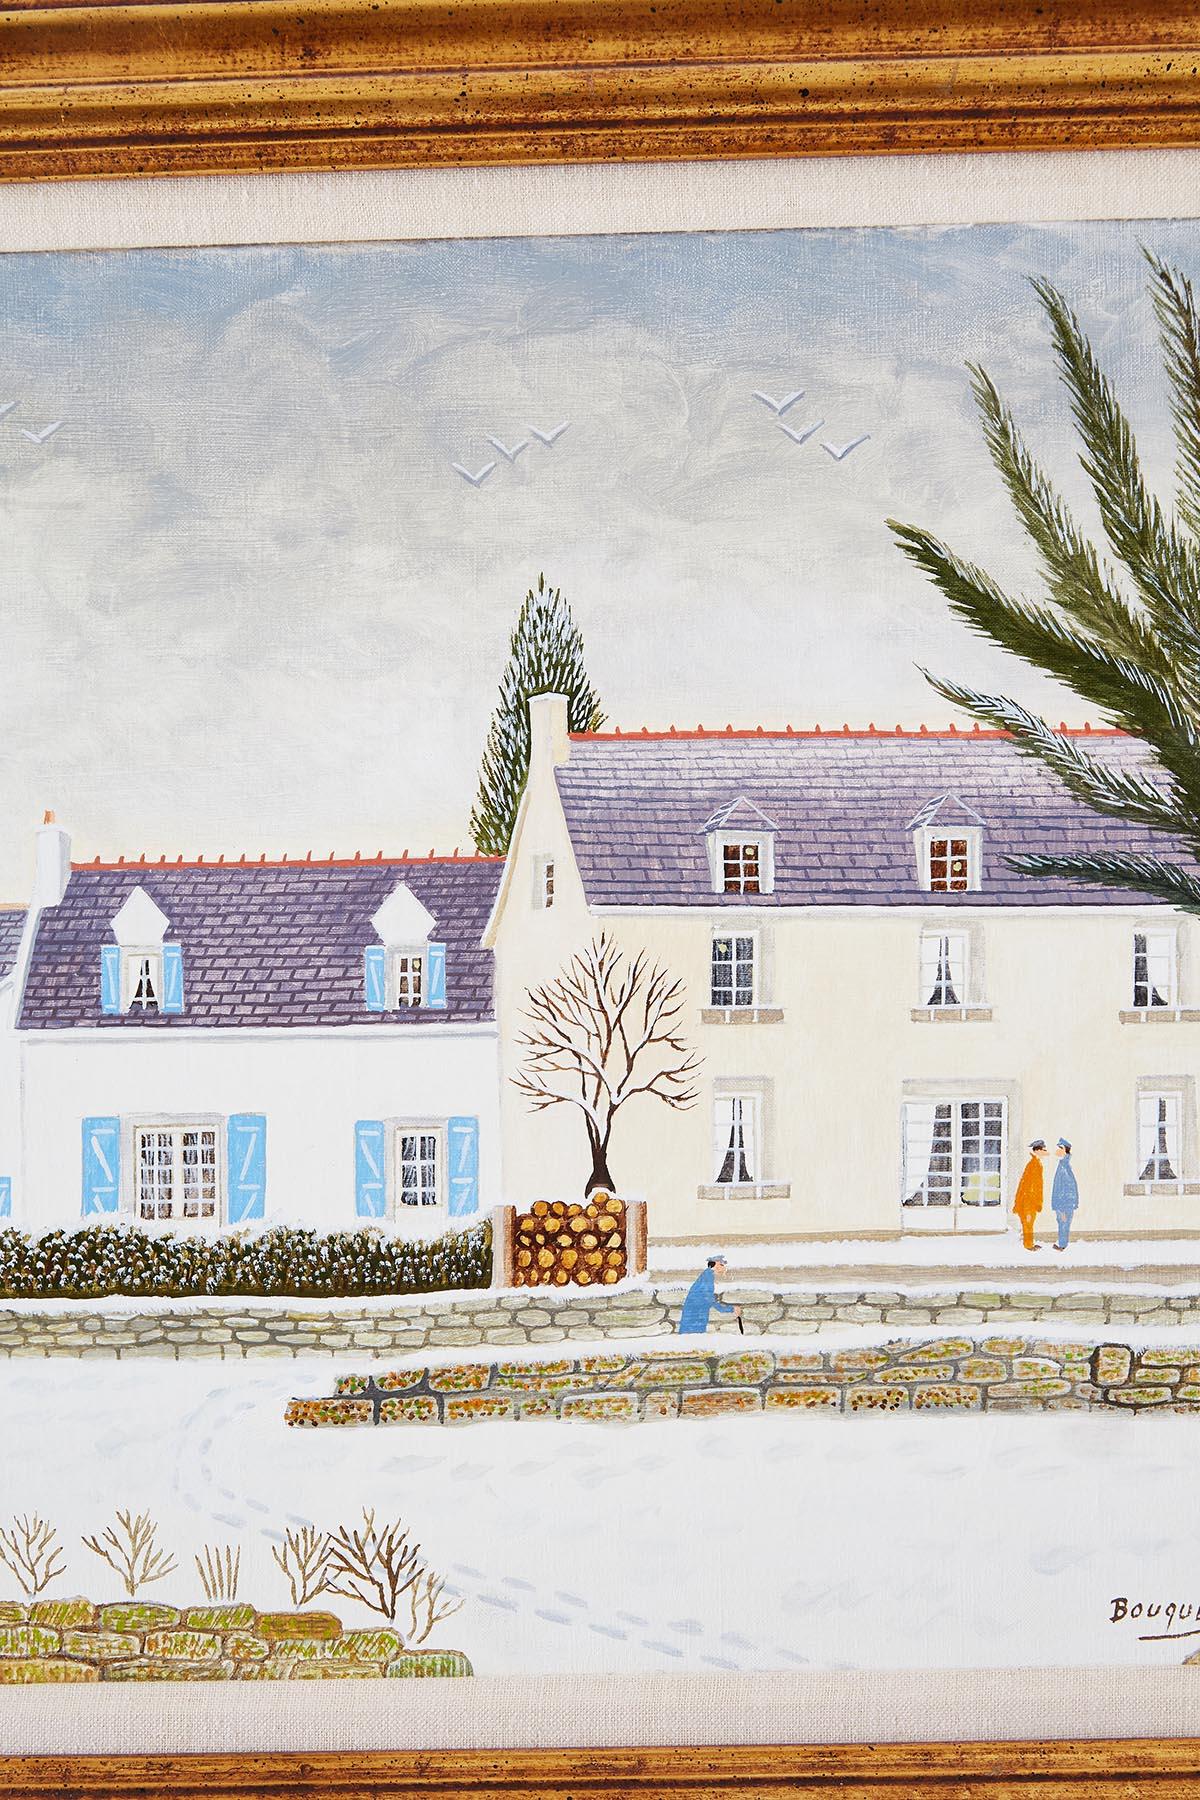 Folk Art style Andre Bouquet (1897-1987 French) oil on canvas painting of a winter scene with house and snow. Intricately painted the artist was known for capturing minute details in his art. This particular painting has an Americana style